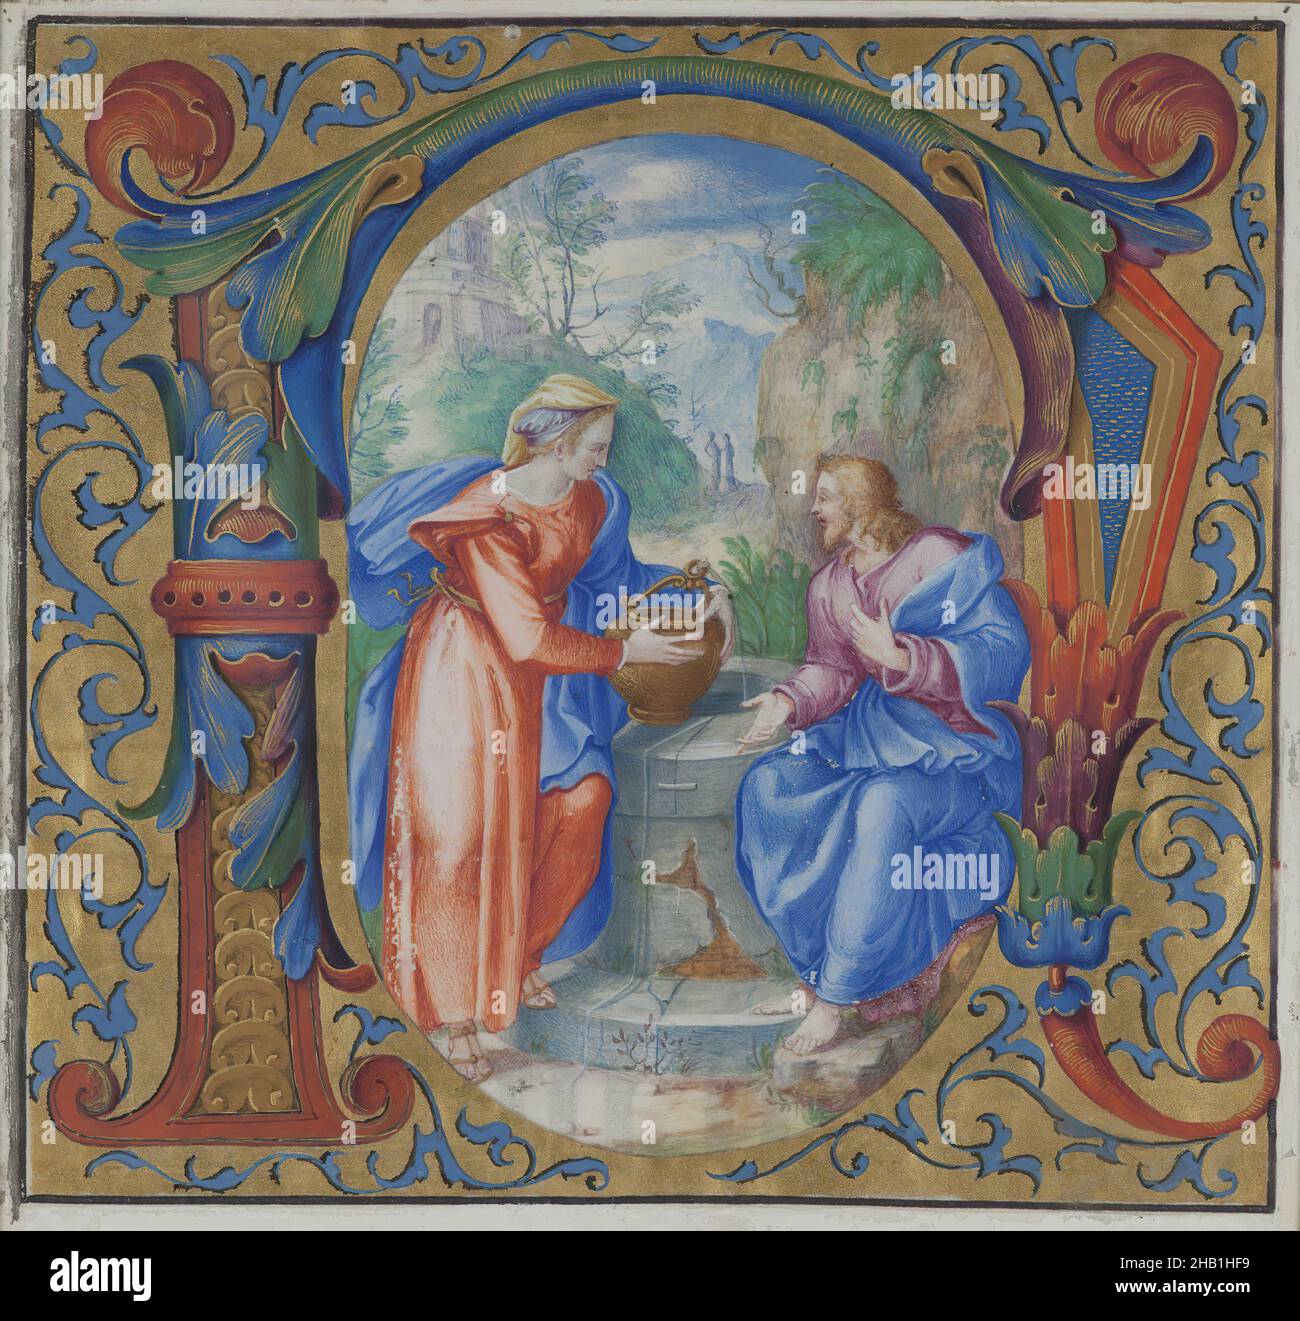 Two Manuscript Illuminations with Initials Mounted in One Frame:, N Christ and the Woman of Samaria at the Well and, L The Return of the Prodigal Son, Vellum, 16th century, 14 1/2 x 21 in., 36.8 x 53.3 cm, Bible story, Biblical, blue, calligraphy, capital, Christian, Christianity, color, Jesus, letter, ornate, parable, pattern, red, religion, religious, Saint Photine, script, scripture, scrolls Stock Photo